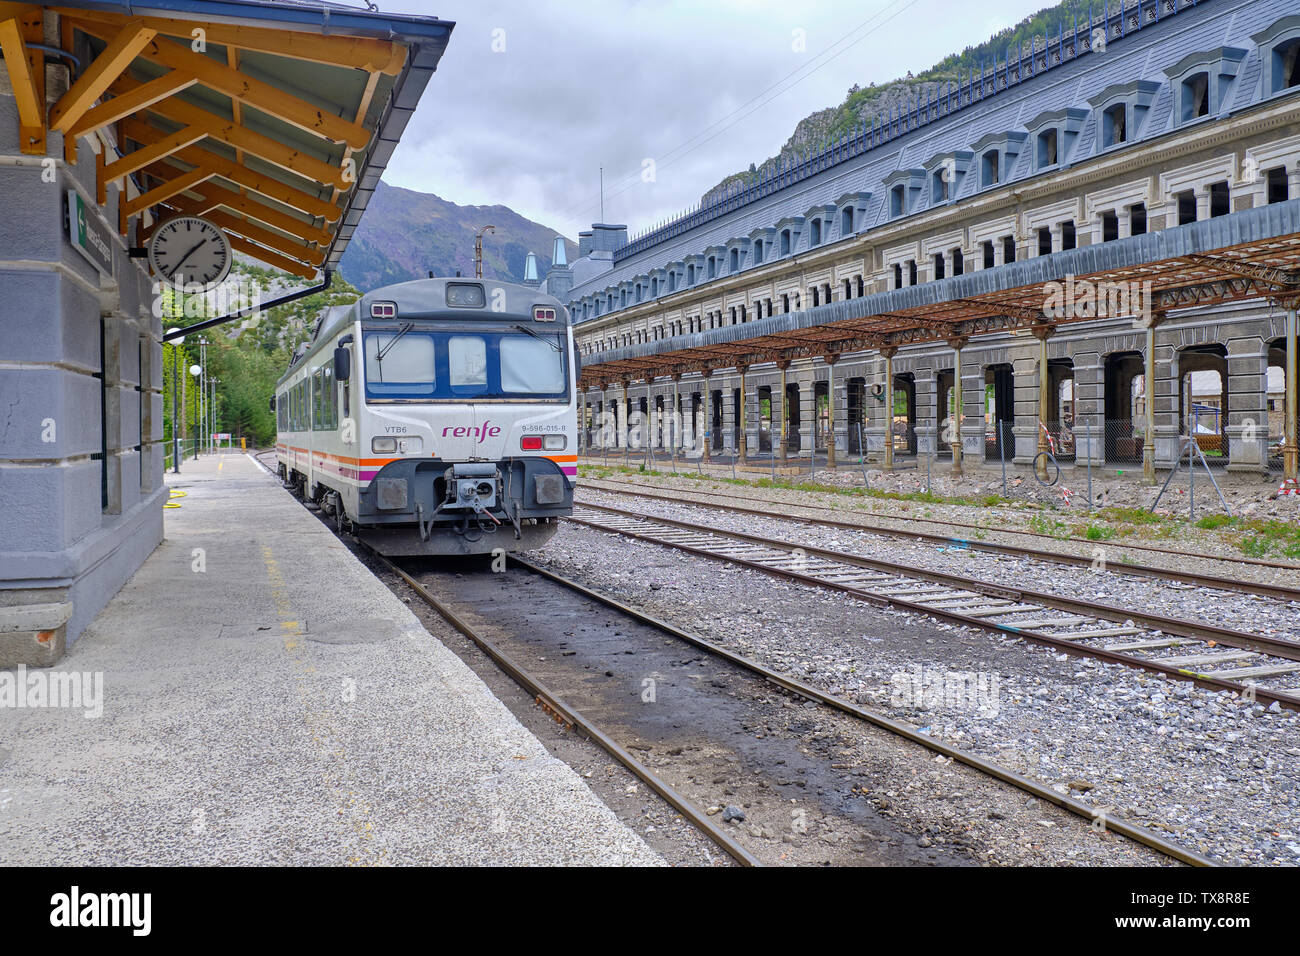 One car train waiting in station on small platform next to the former abandonned one from the town's glory days. Canfranc Estacion, Spain, May 28, 201 Stock Photo